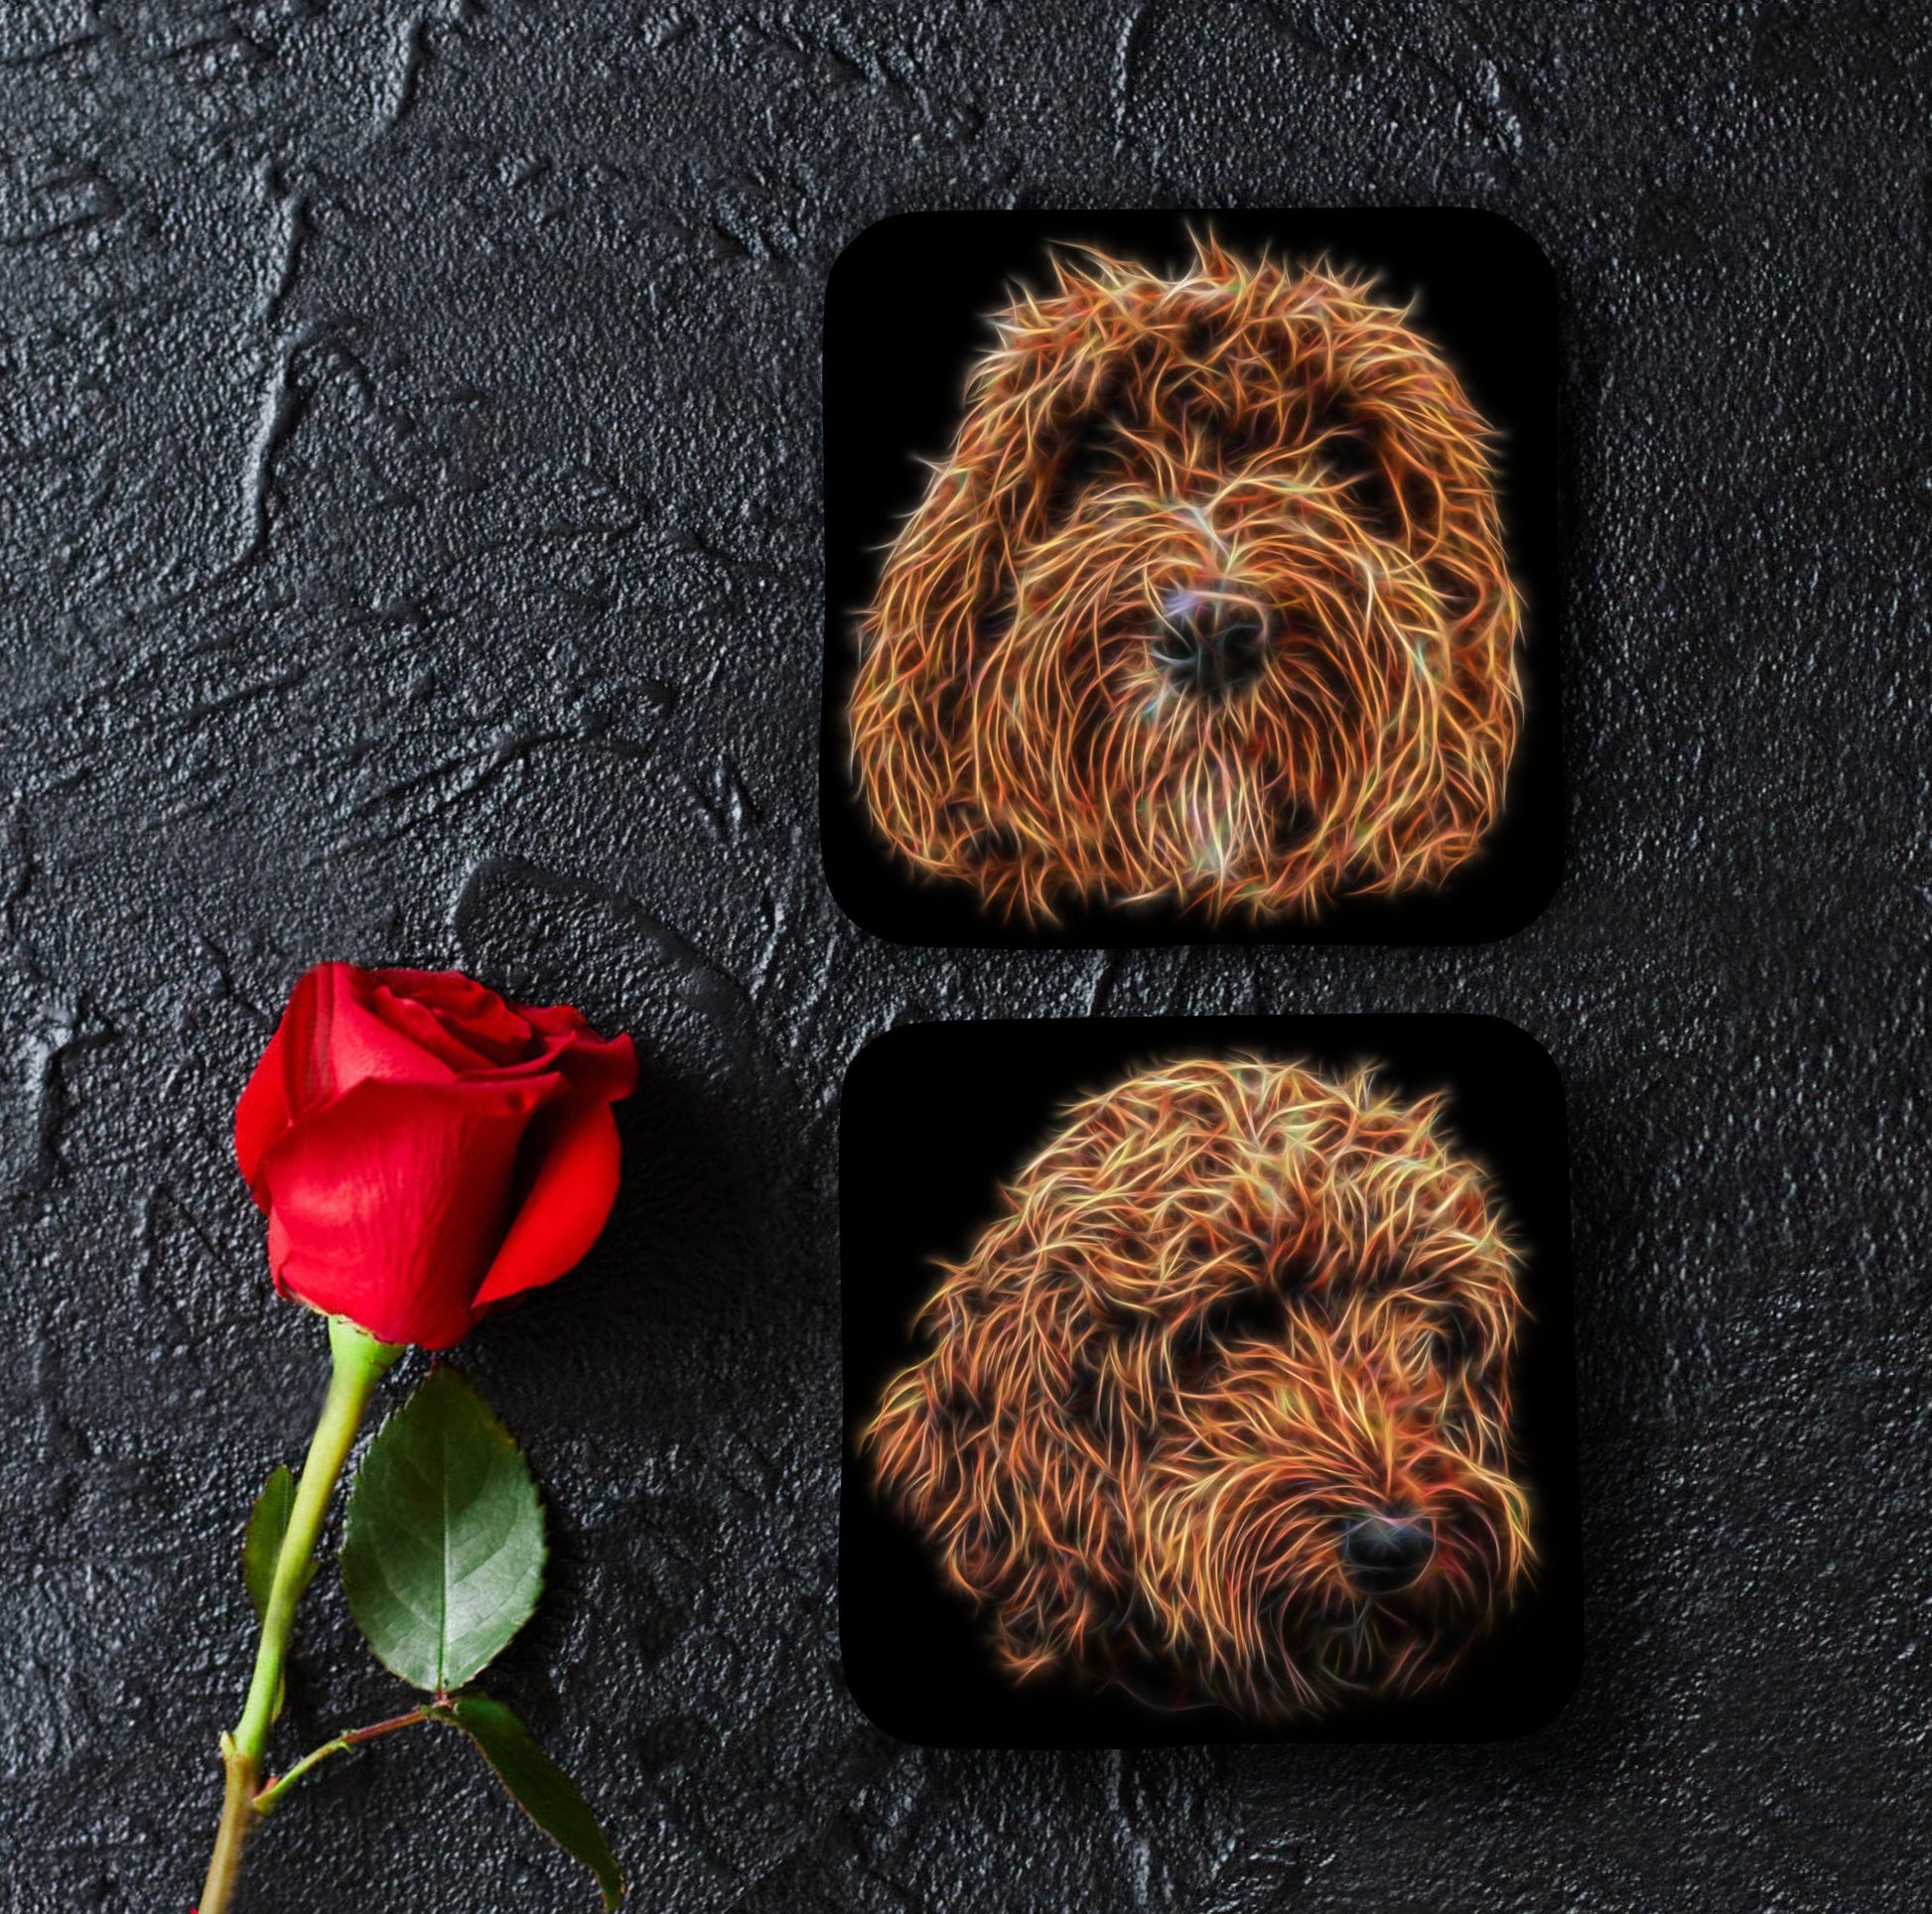 Red Labradoodle Coasters, Set of 2, with Stunning Fractal Art Design